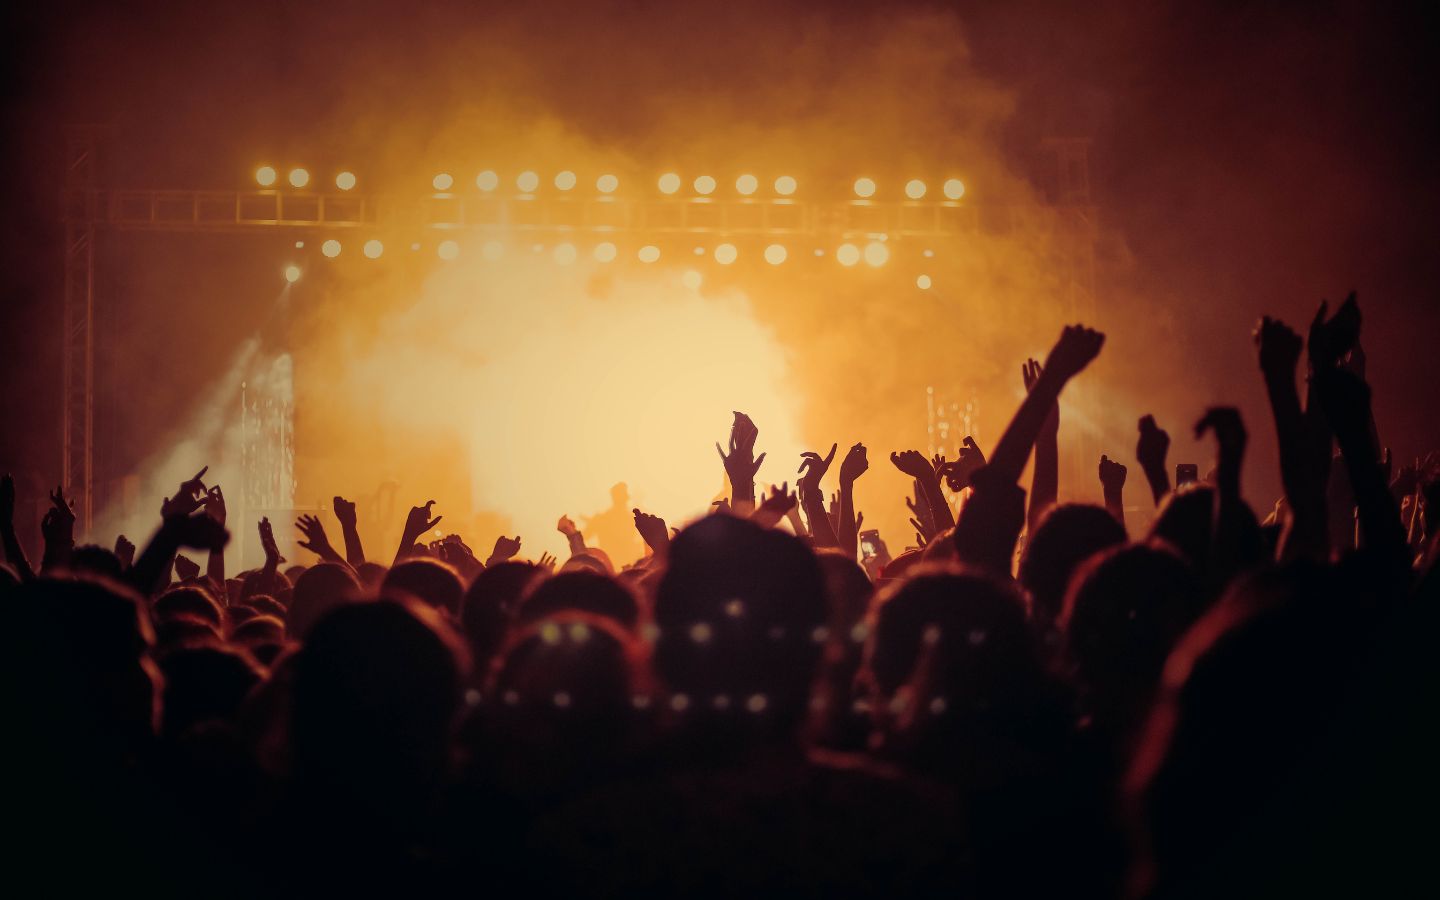 silhouette of a large crowd at a concert with hands up in front of a smokey stage with yellow lights